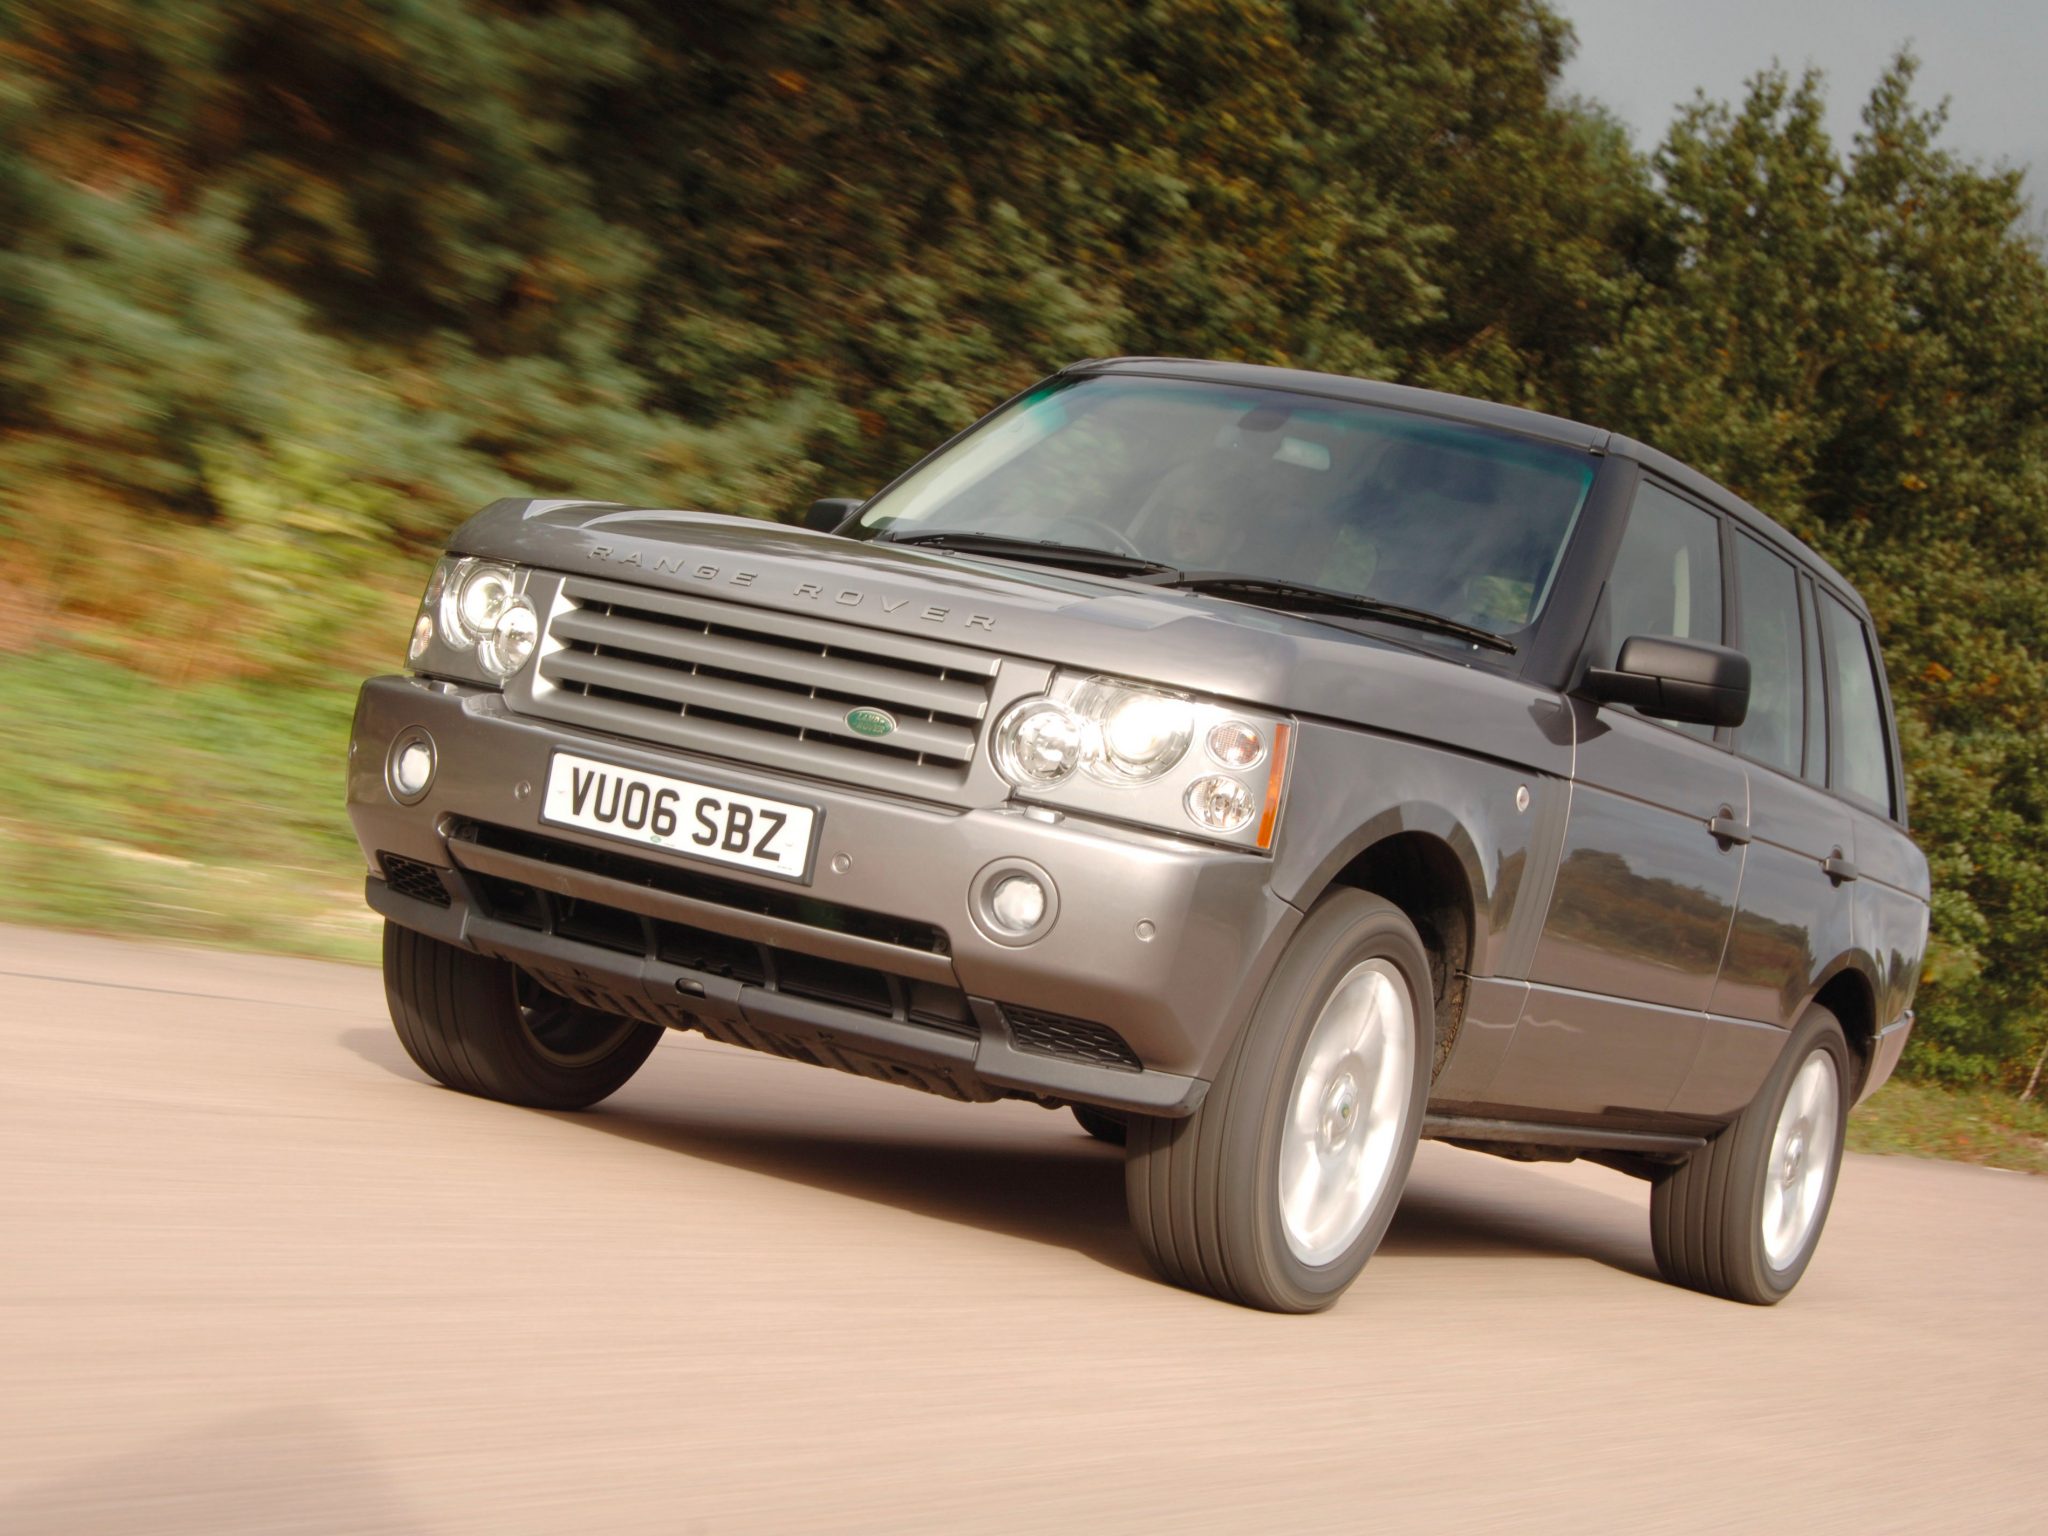 Used Range Rover buyer's guide - Practical Caravan How Much Can A Range Rover Tow